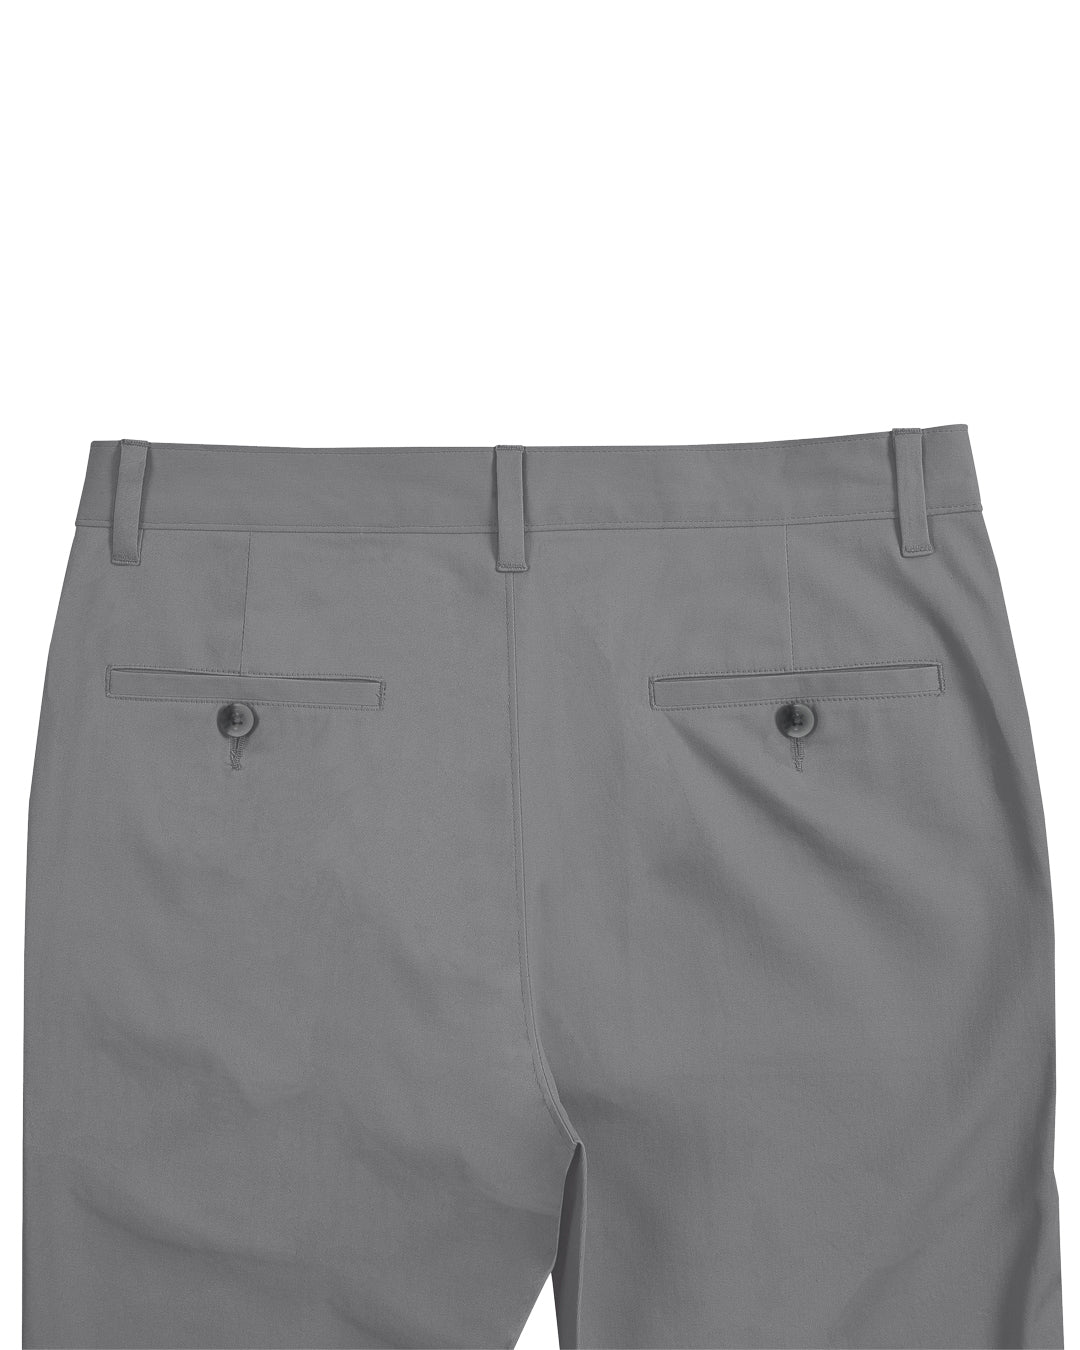 Open front view of custom Genoa Chino pants for men by Luxire in dark grey